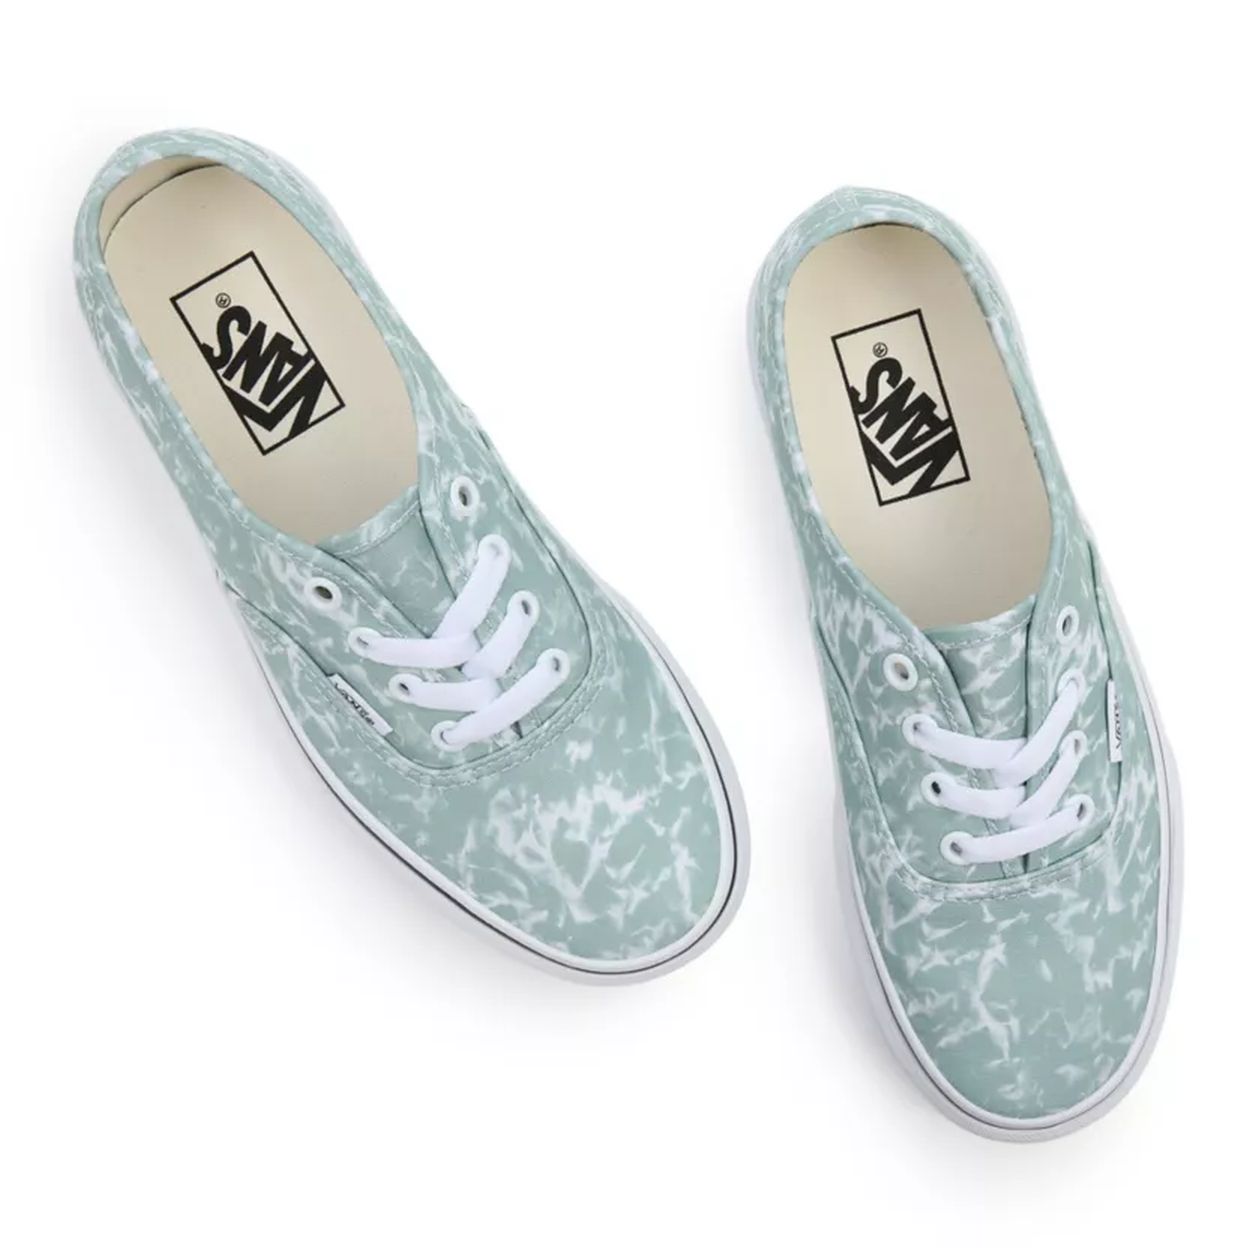 Authentic Vans in Farbe celadon green/ true White